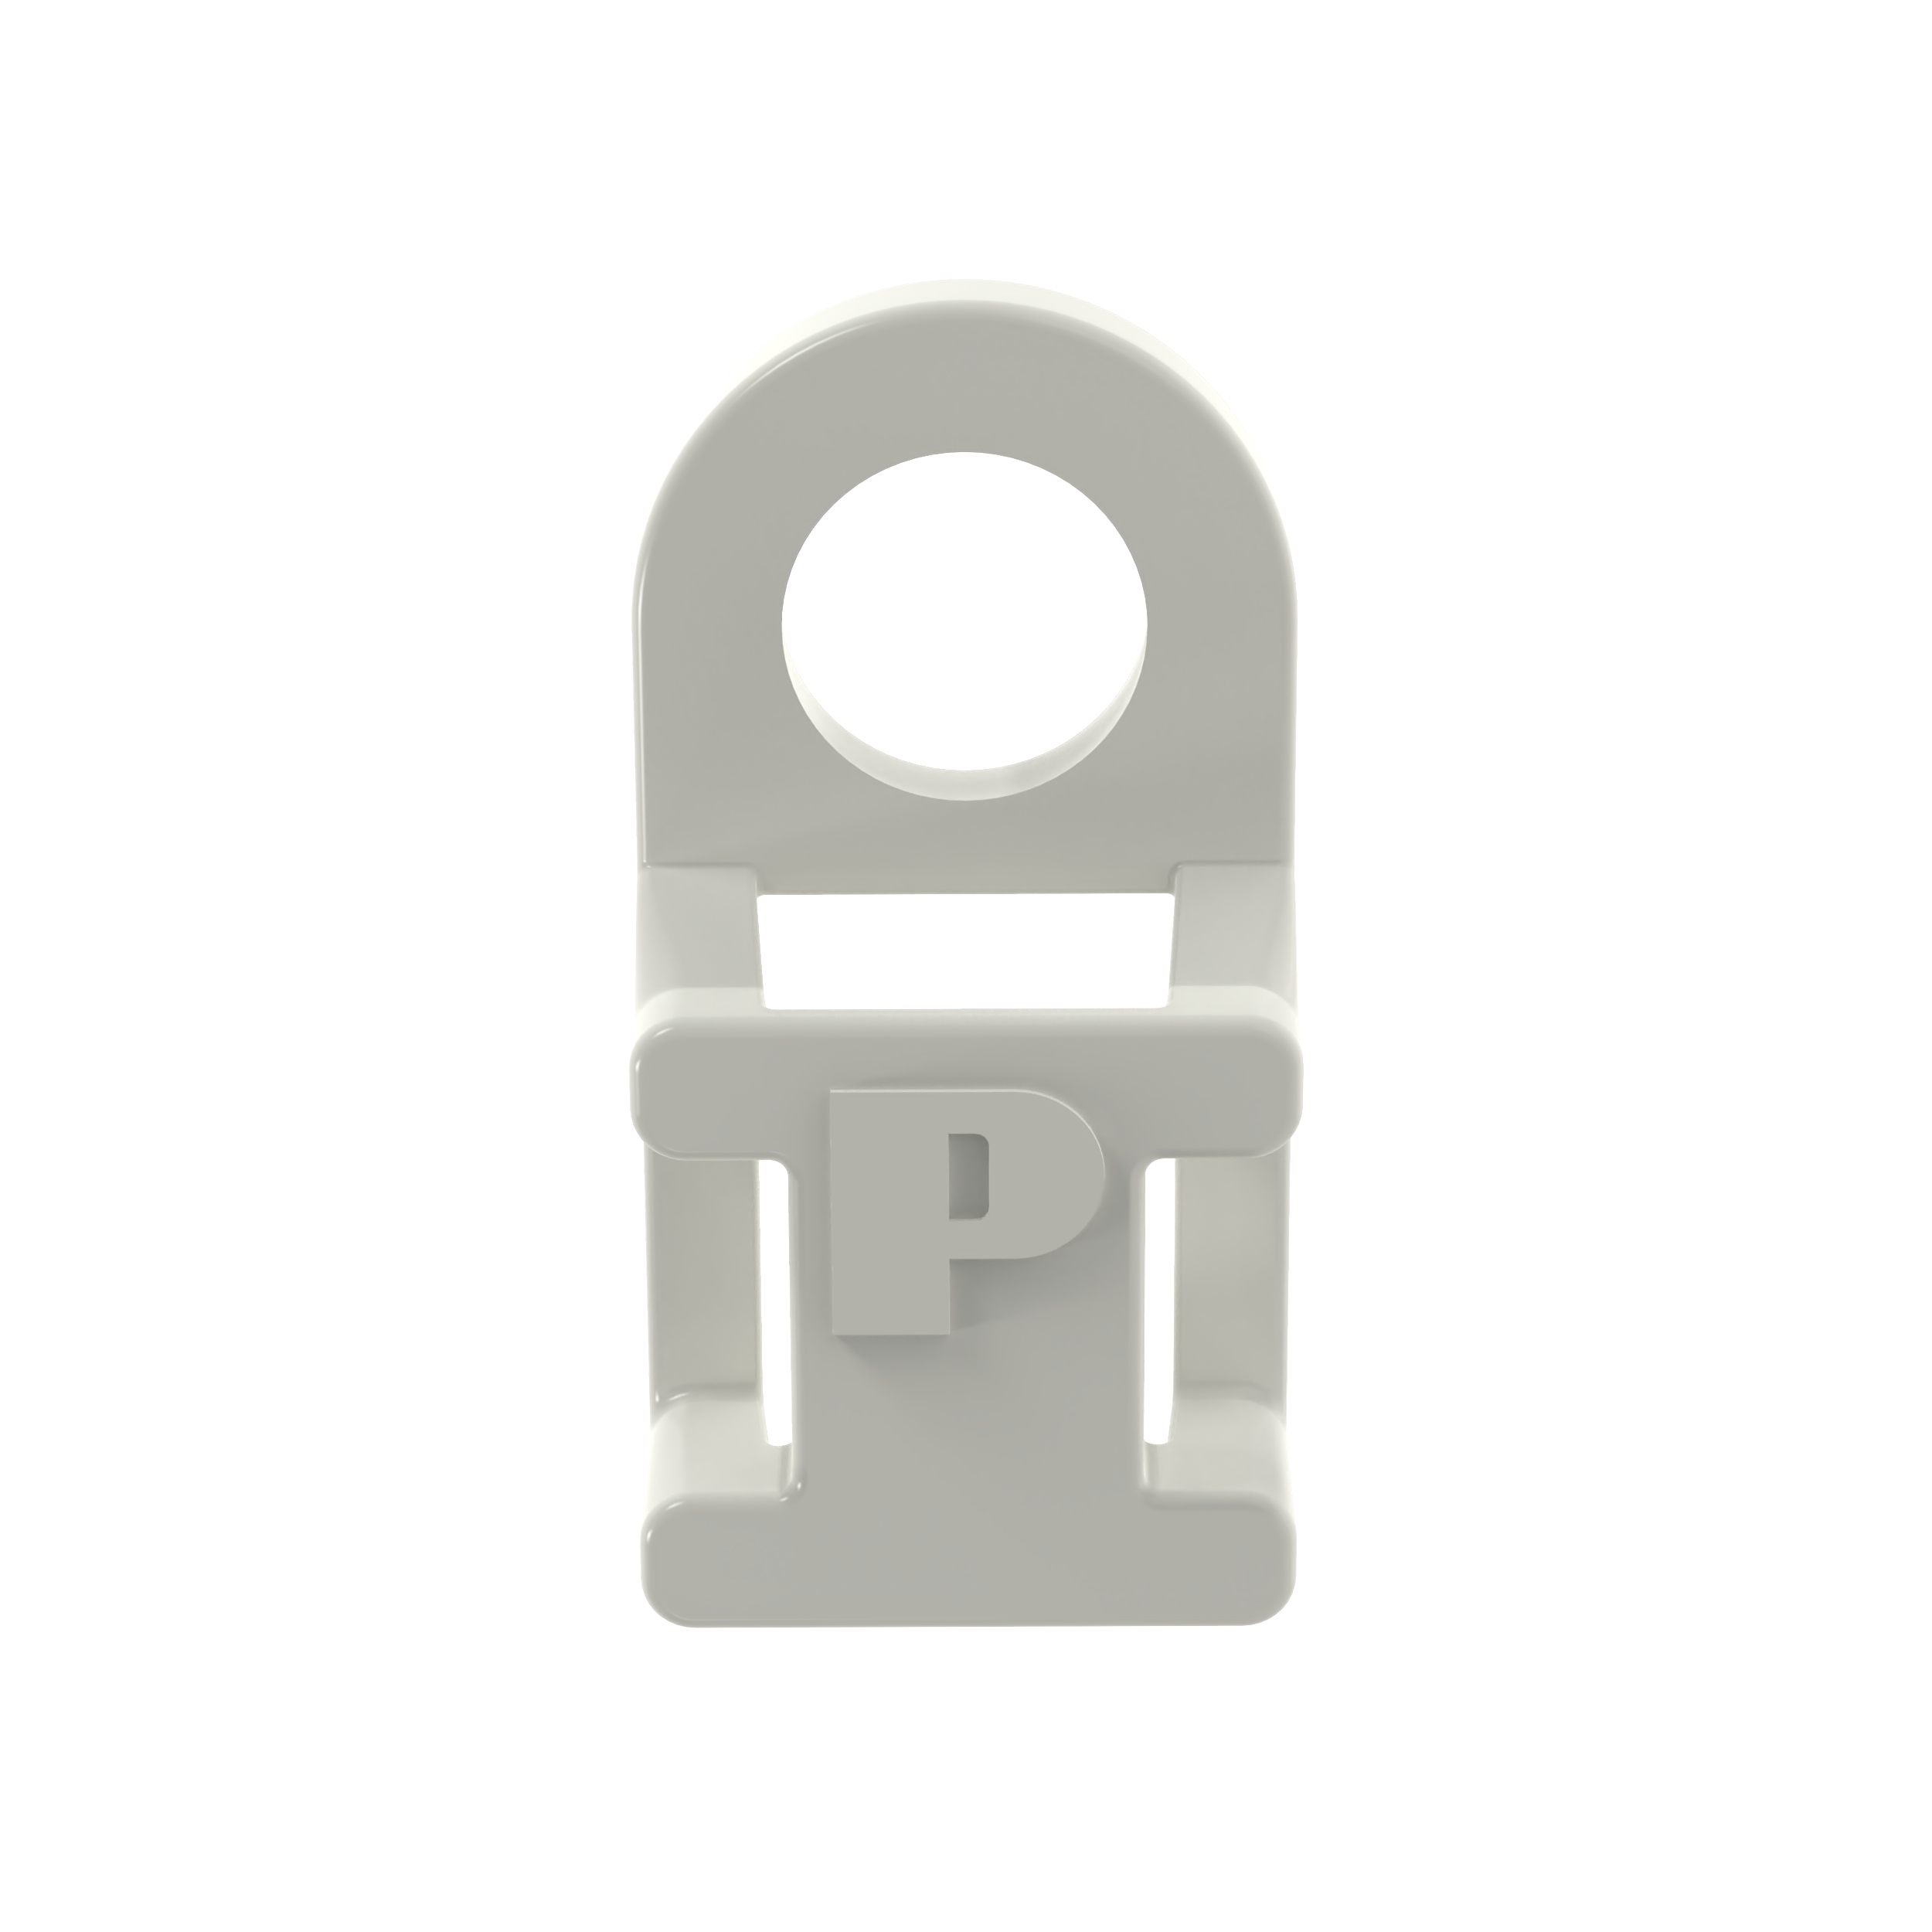 0.2 Hole Diameter #10 Screw Mounting Method Outdoors Environment Panduit TA1S10-M0 4-Way Tie Anchor Mount Weather Resistant Nylon 6.6 Black Pack of 1000 Screw Applied